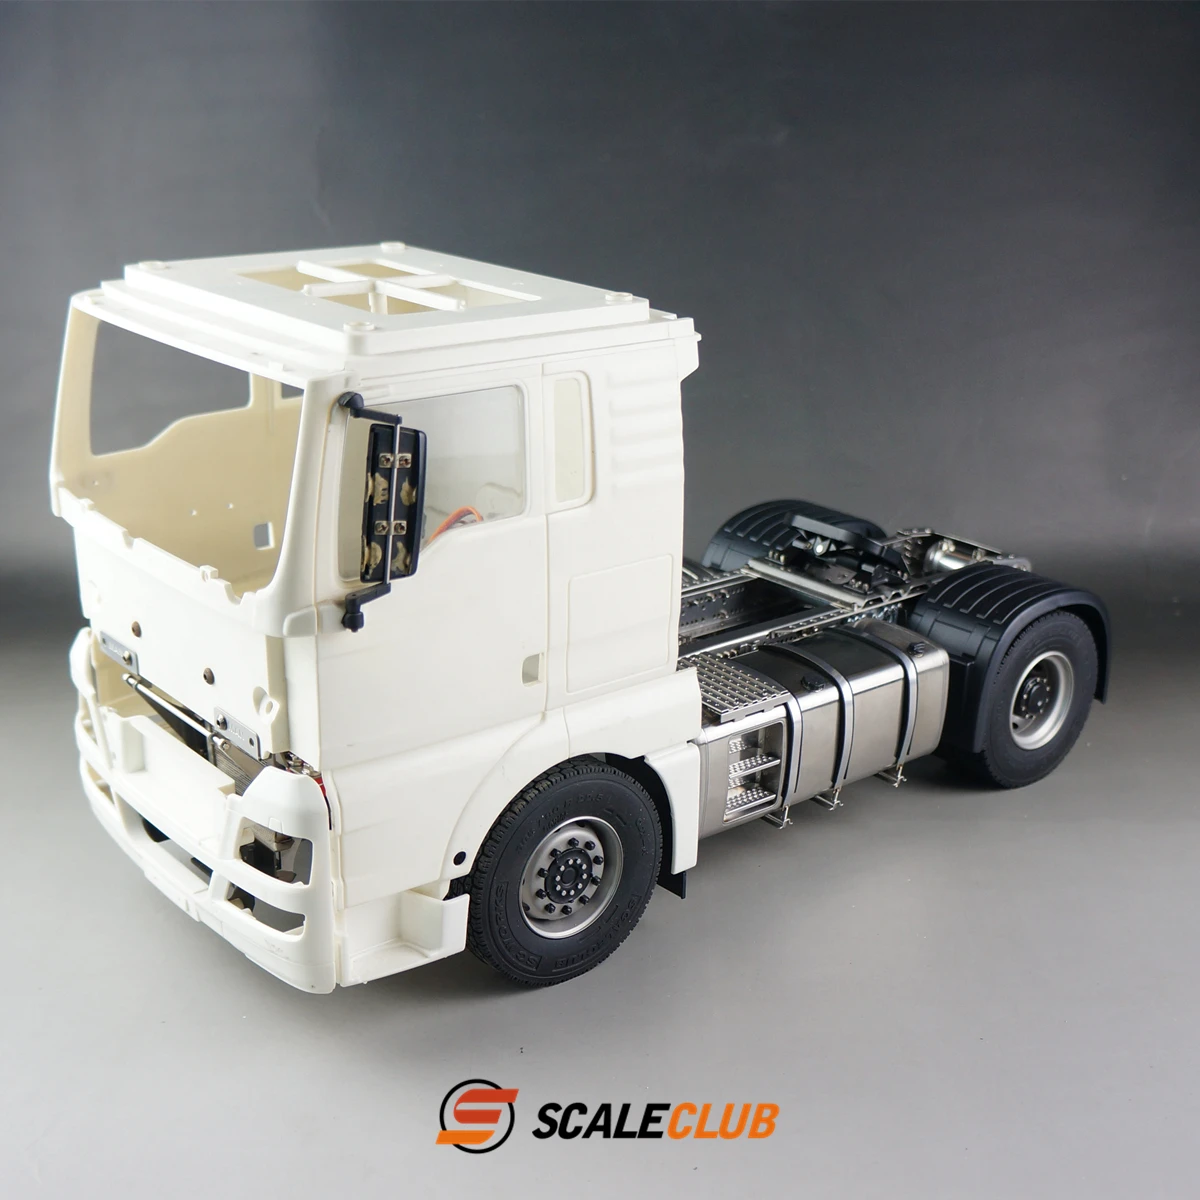 

Scaleclub Model 1/14 For Tamiya Man Full Metal 4x4 4x2 Chassis For Lesu Scania Actros Volvo Car Parts Rc Truck Trailer